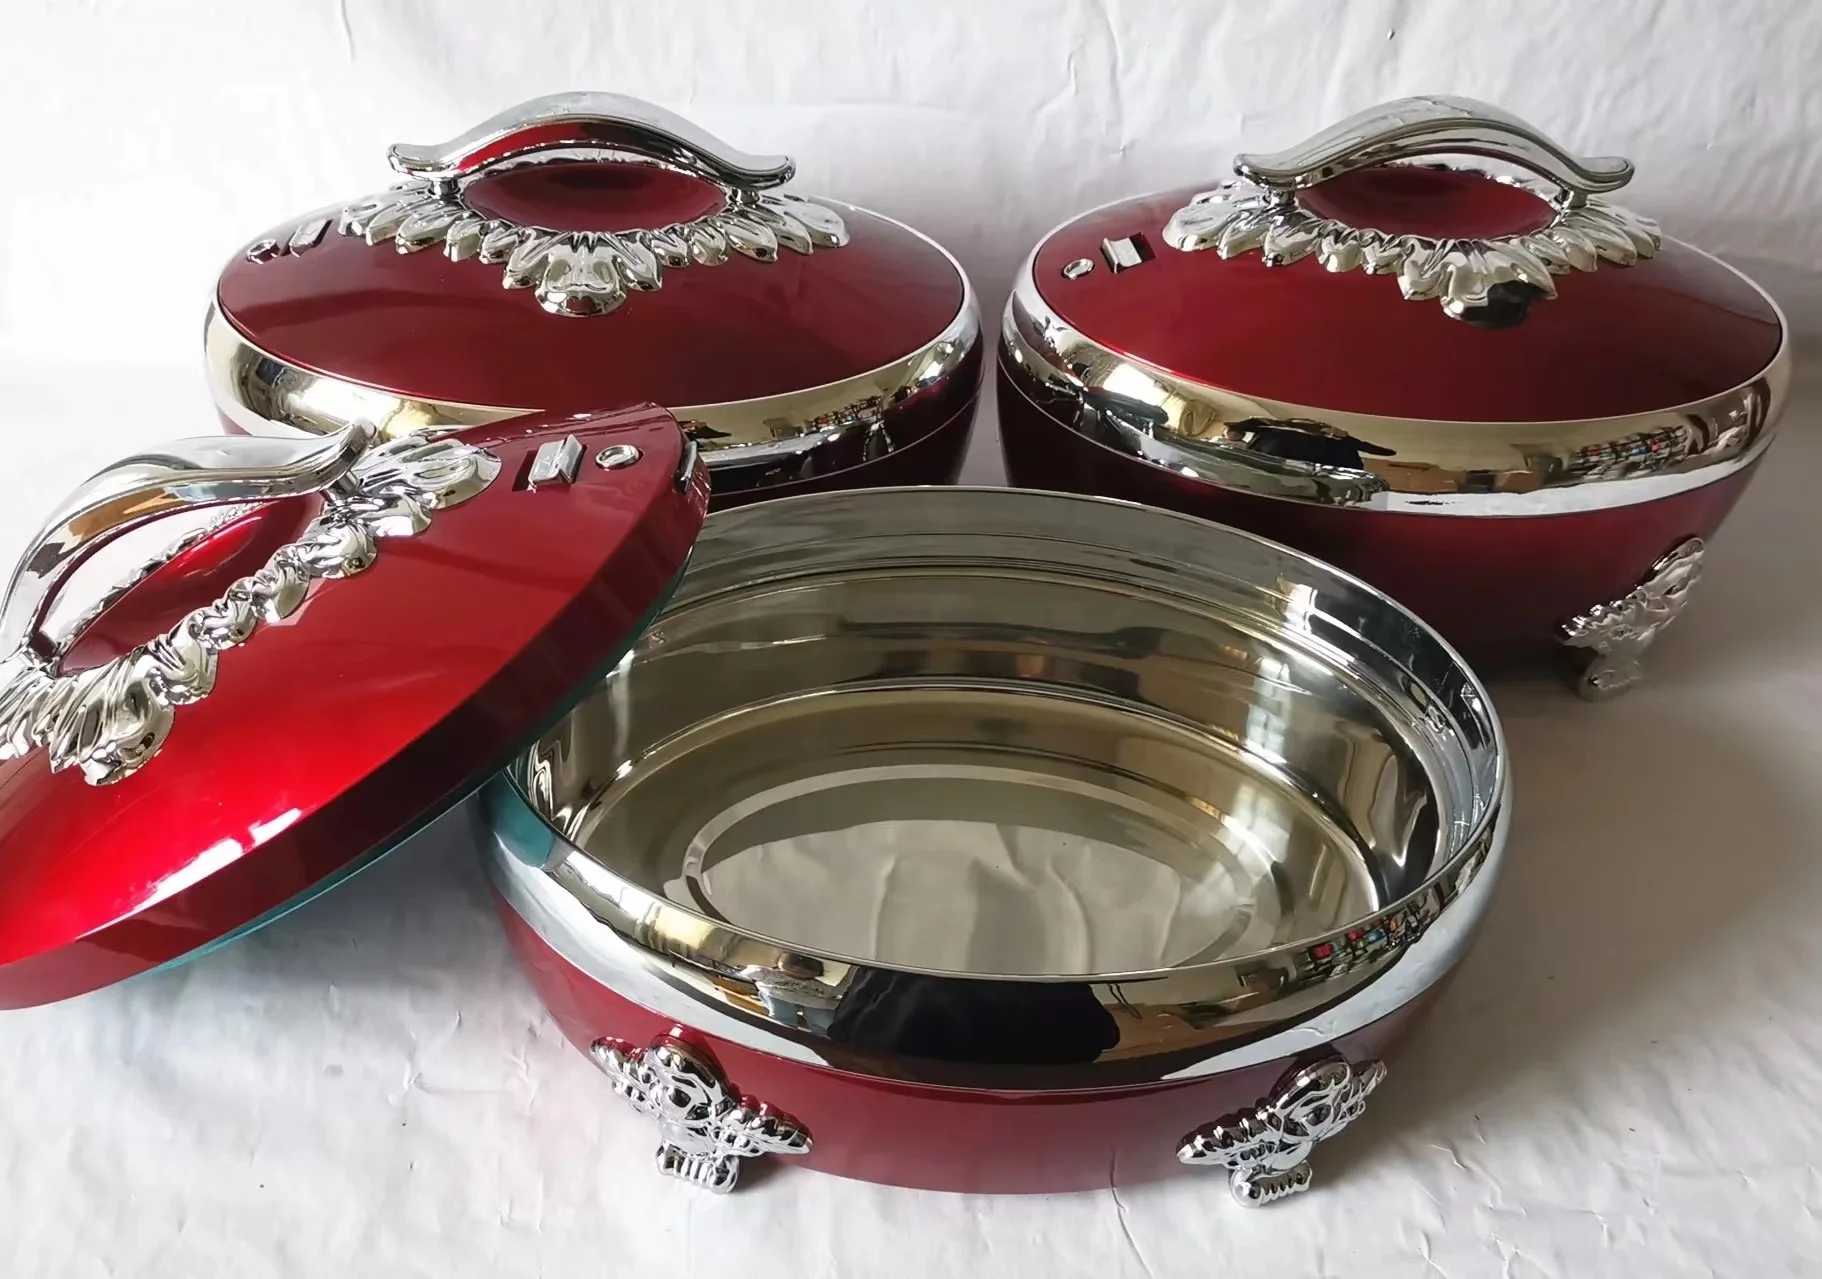 Wholesale High Quality Insulated Casserole Food Warmer4L+5L+6L 3pcs SetABS+Stainless Steel Food Warmer